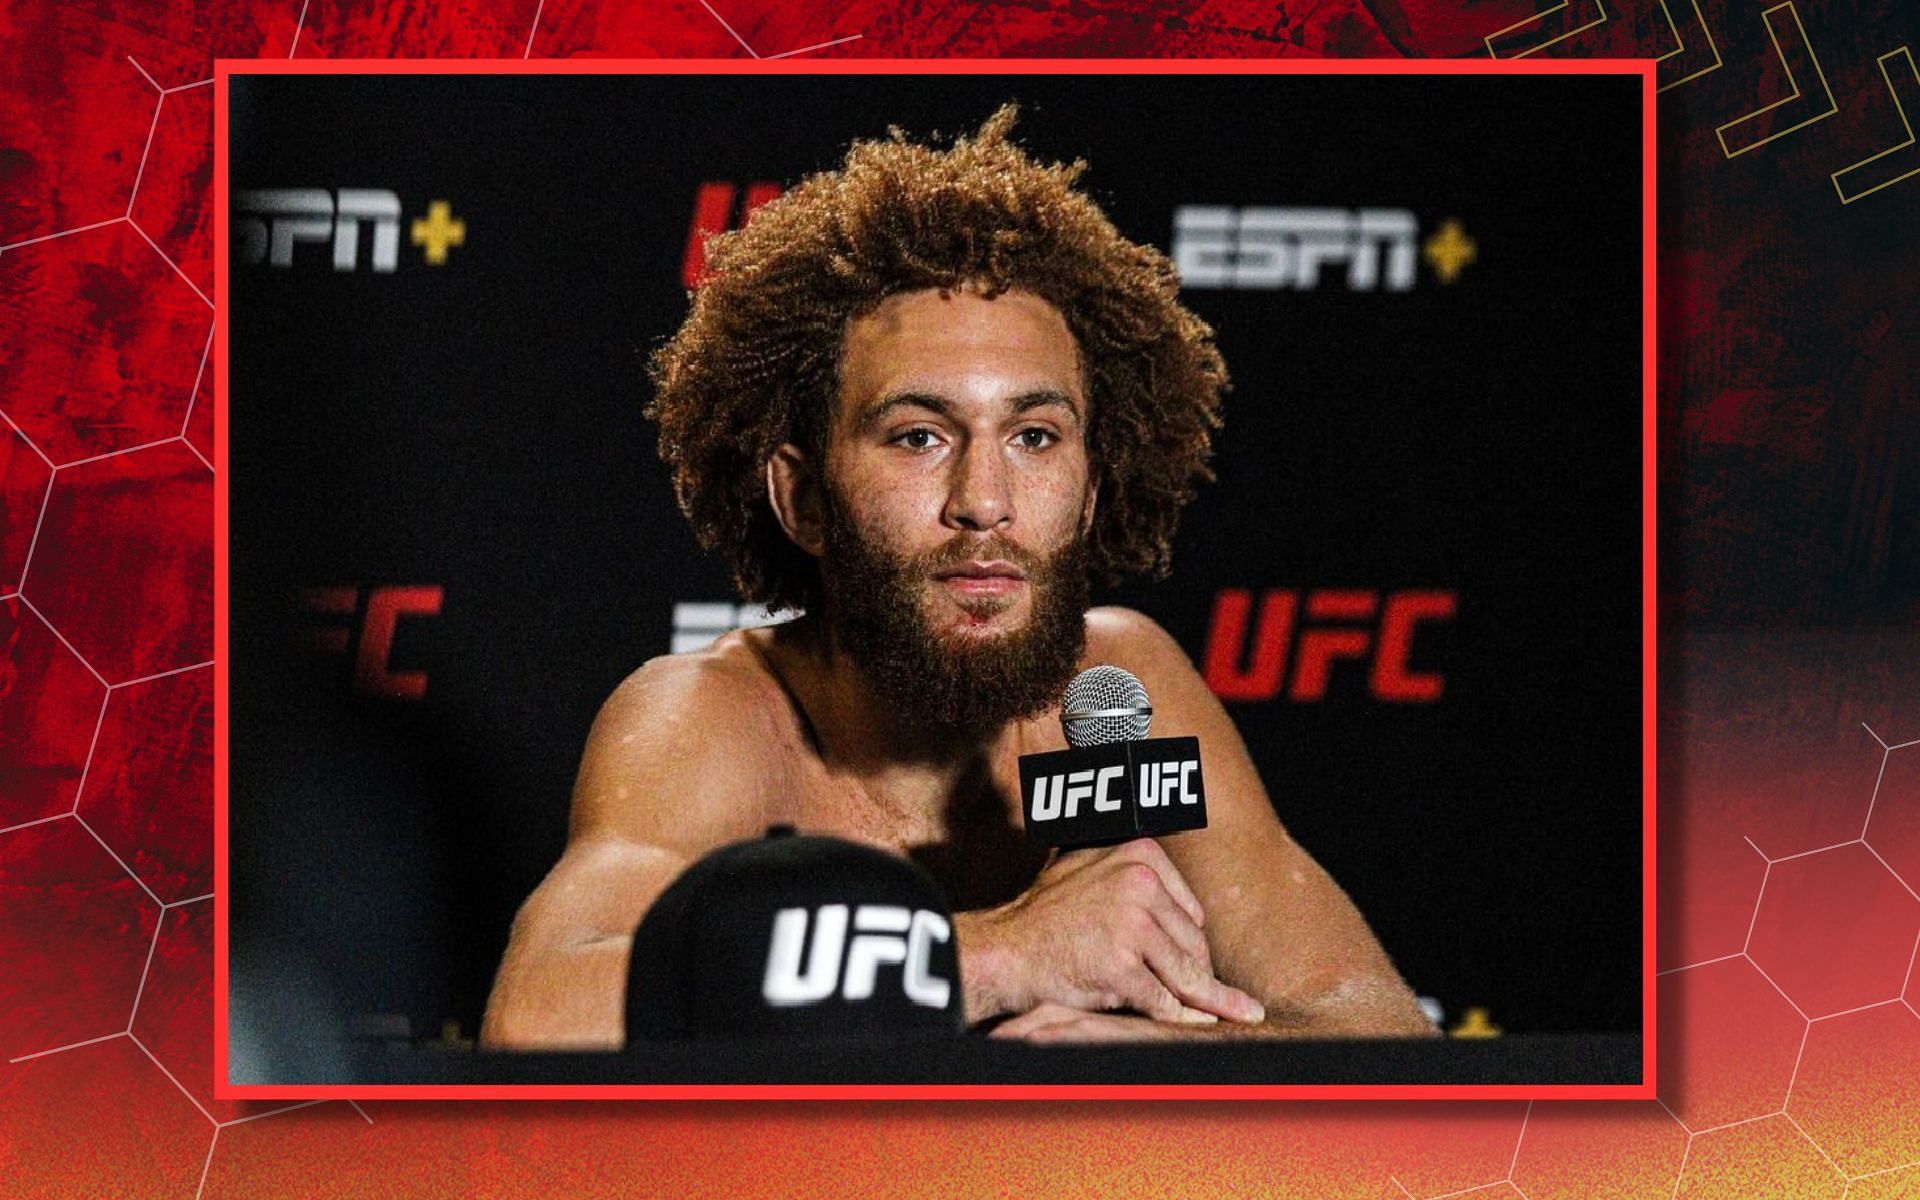 Luis Pena charges dropped. [Image credits: @violentbobross on Instagram]